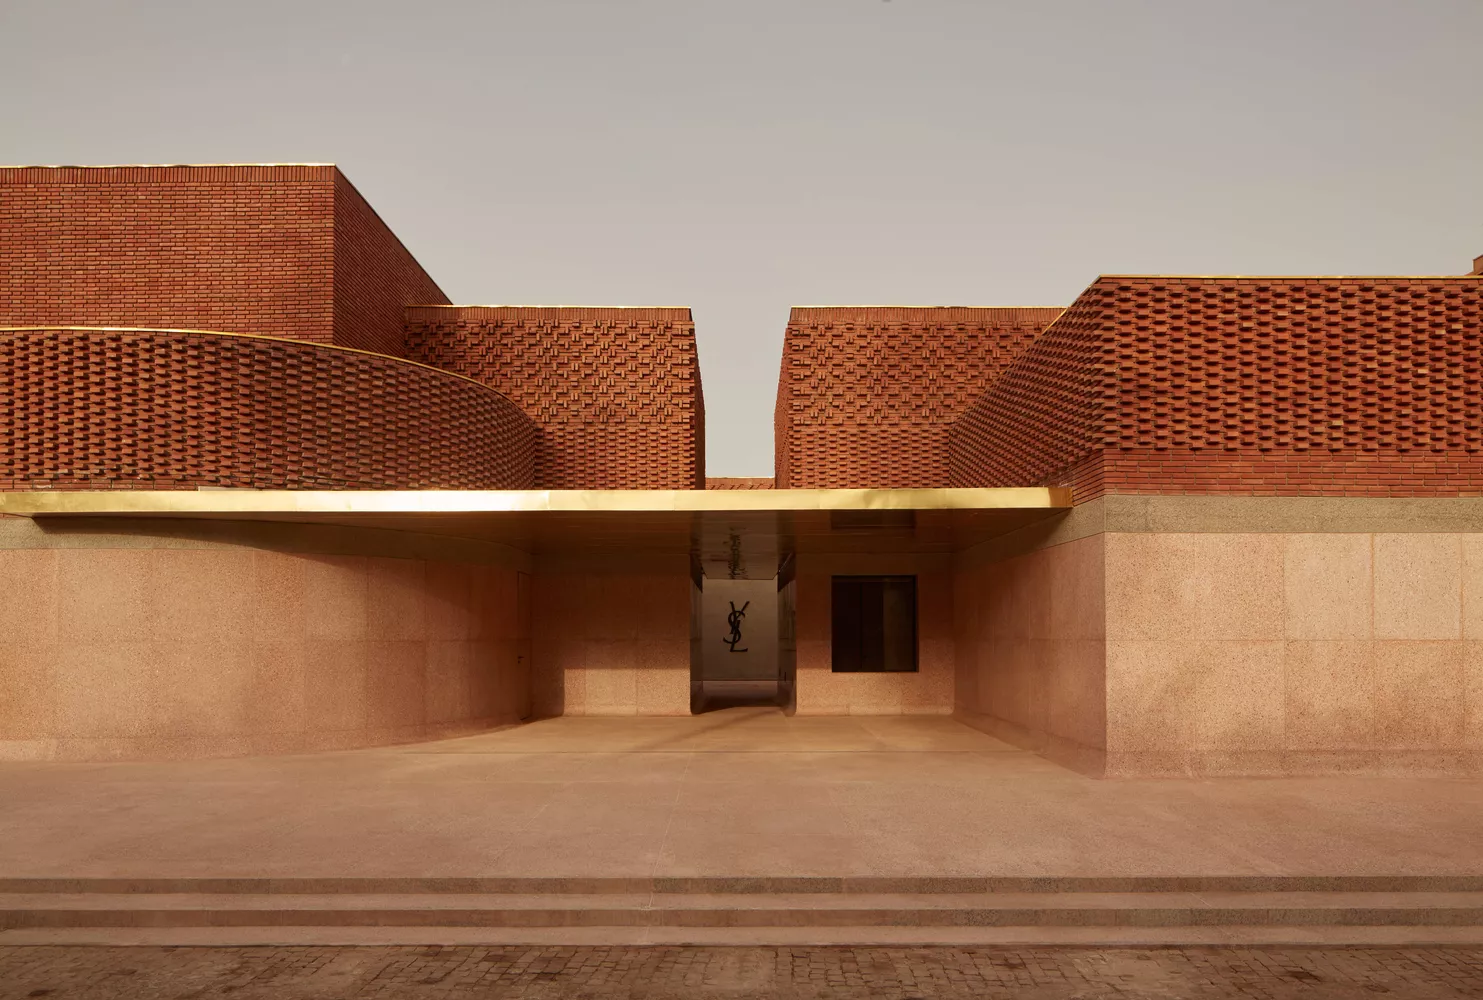 Yves Saint Laurent Museum in Morocco, Africa | Museums - Rated 3.6